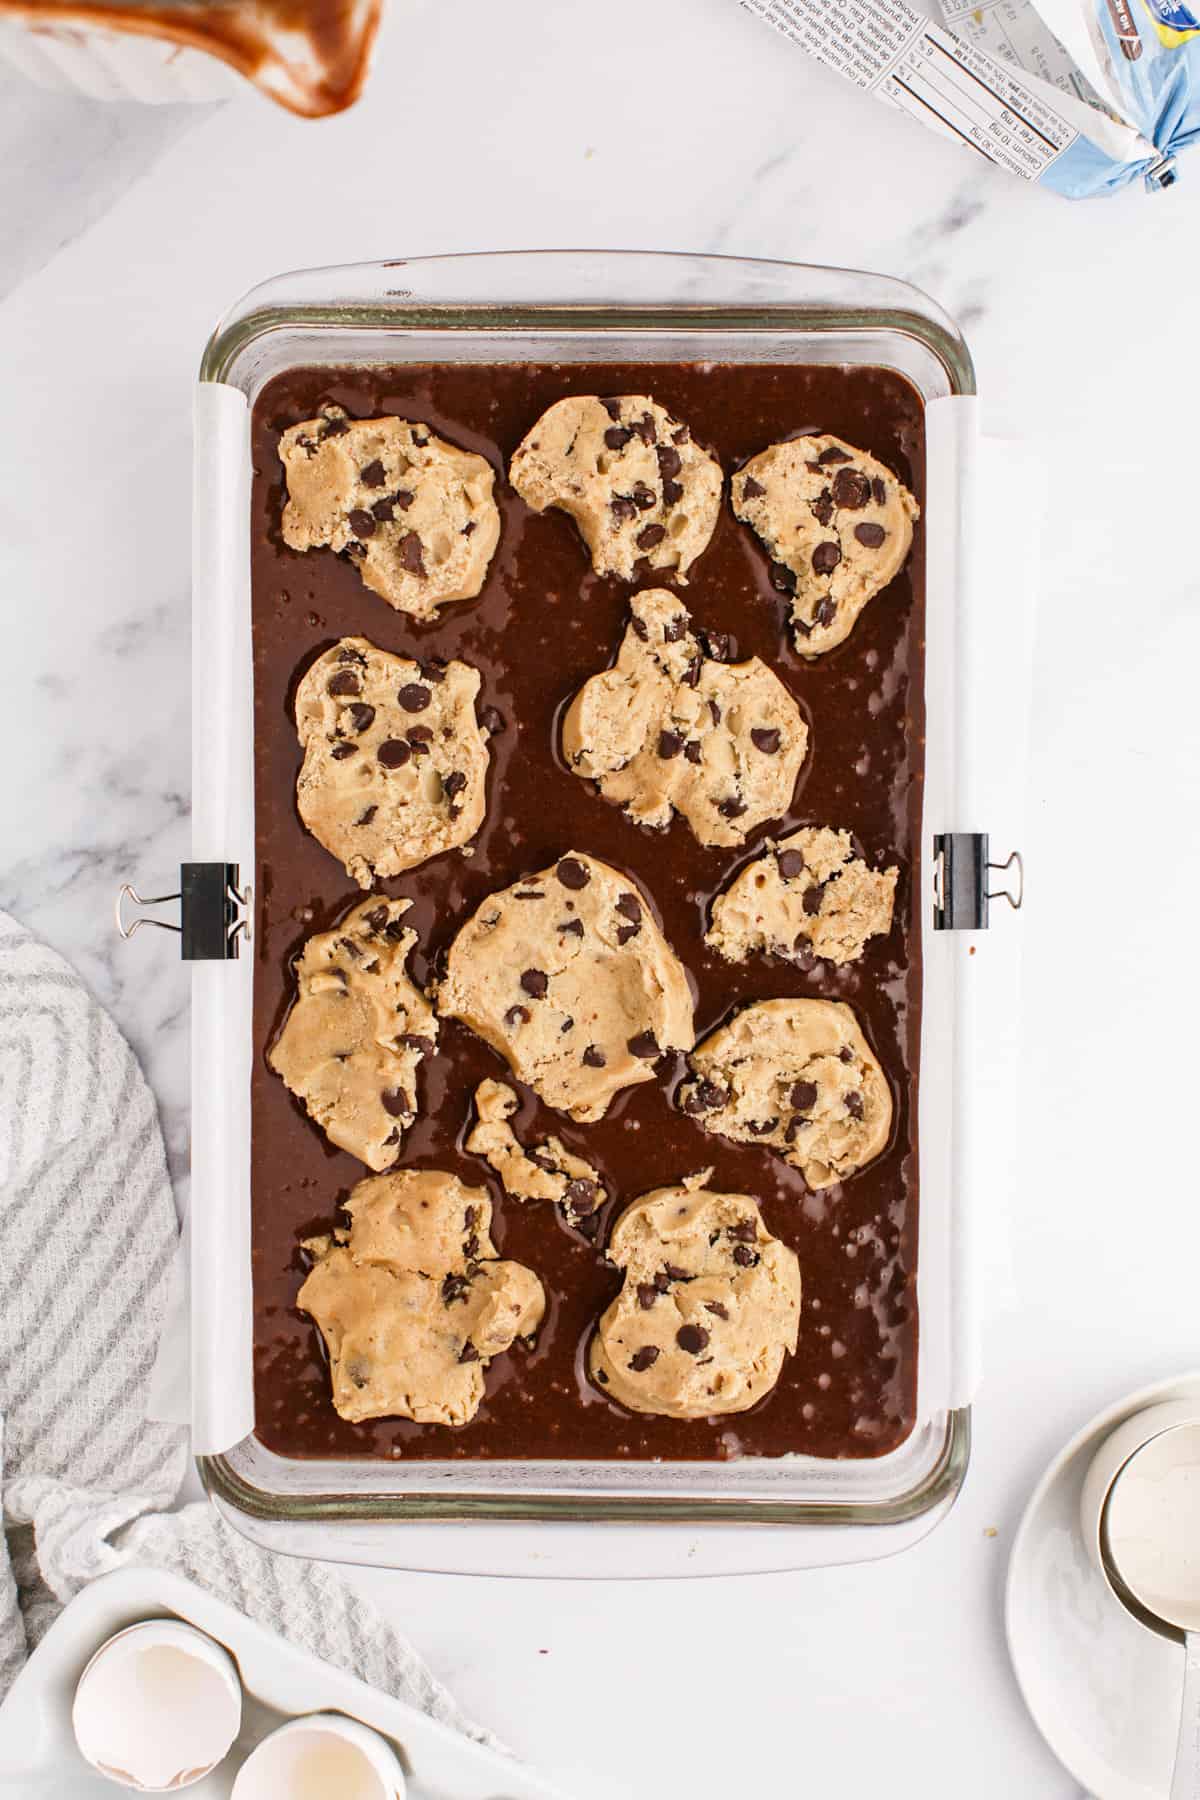 Chocolate chip cookie dough on top of brownie batter in casserole dish.